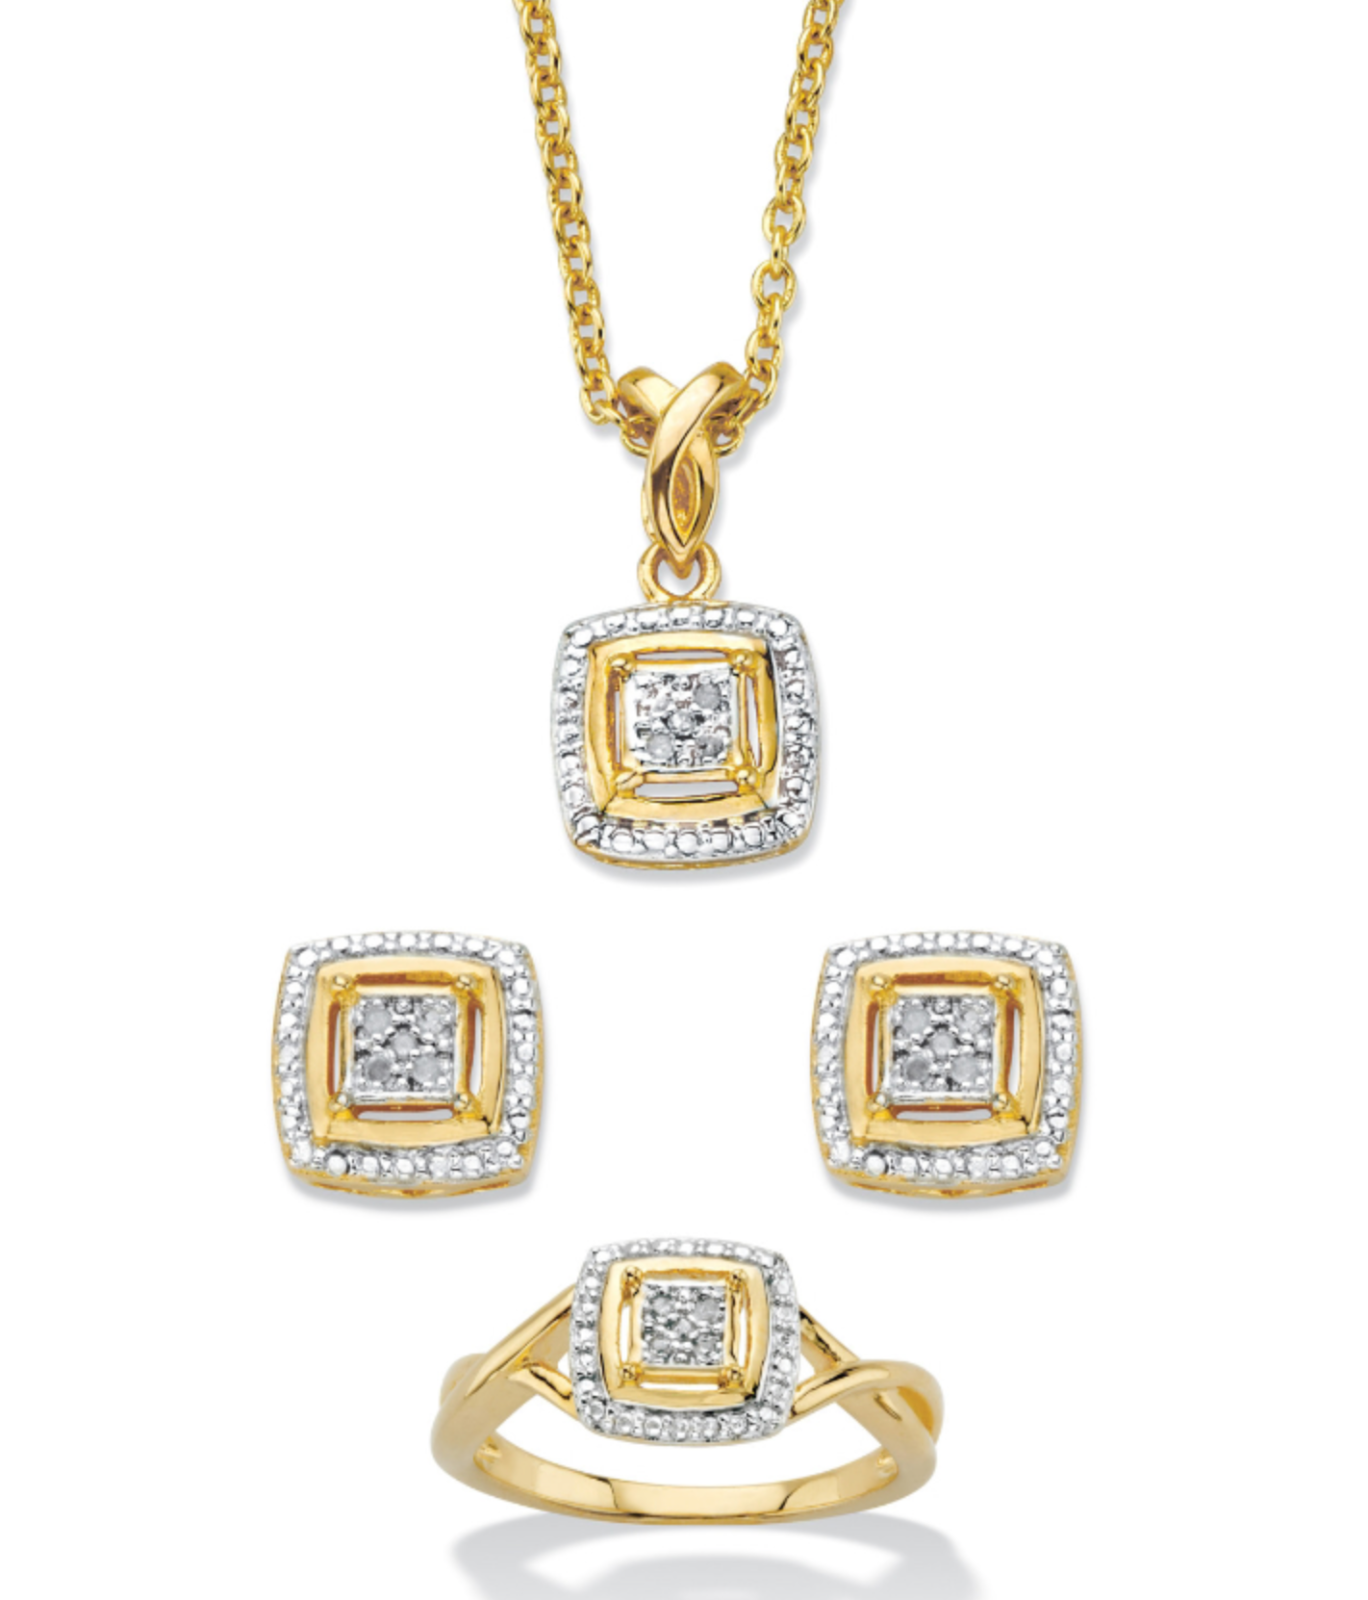 Primary image for 1/10 CARAT TCW DIAMOND ACCENT SQUARED CLUSTER RING EARRINGS NECKLACE SET